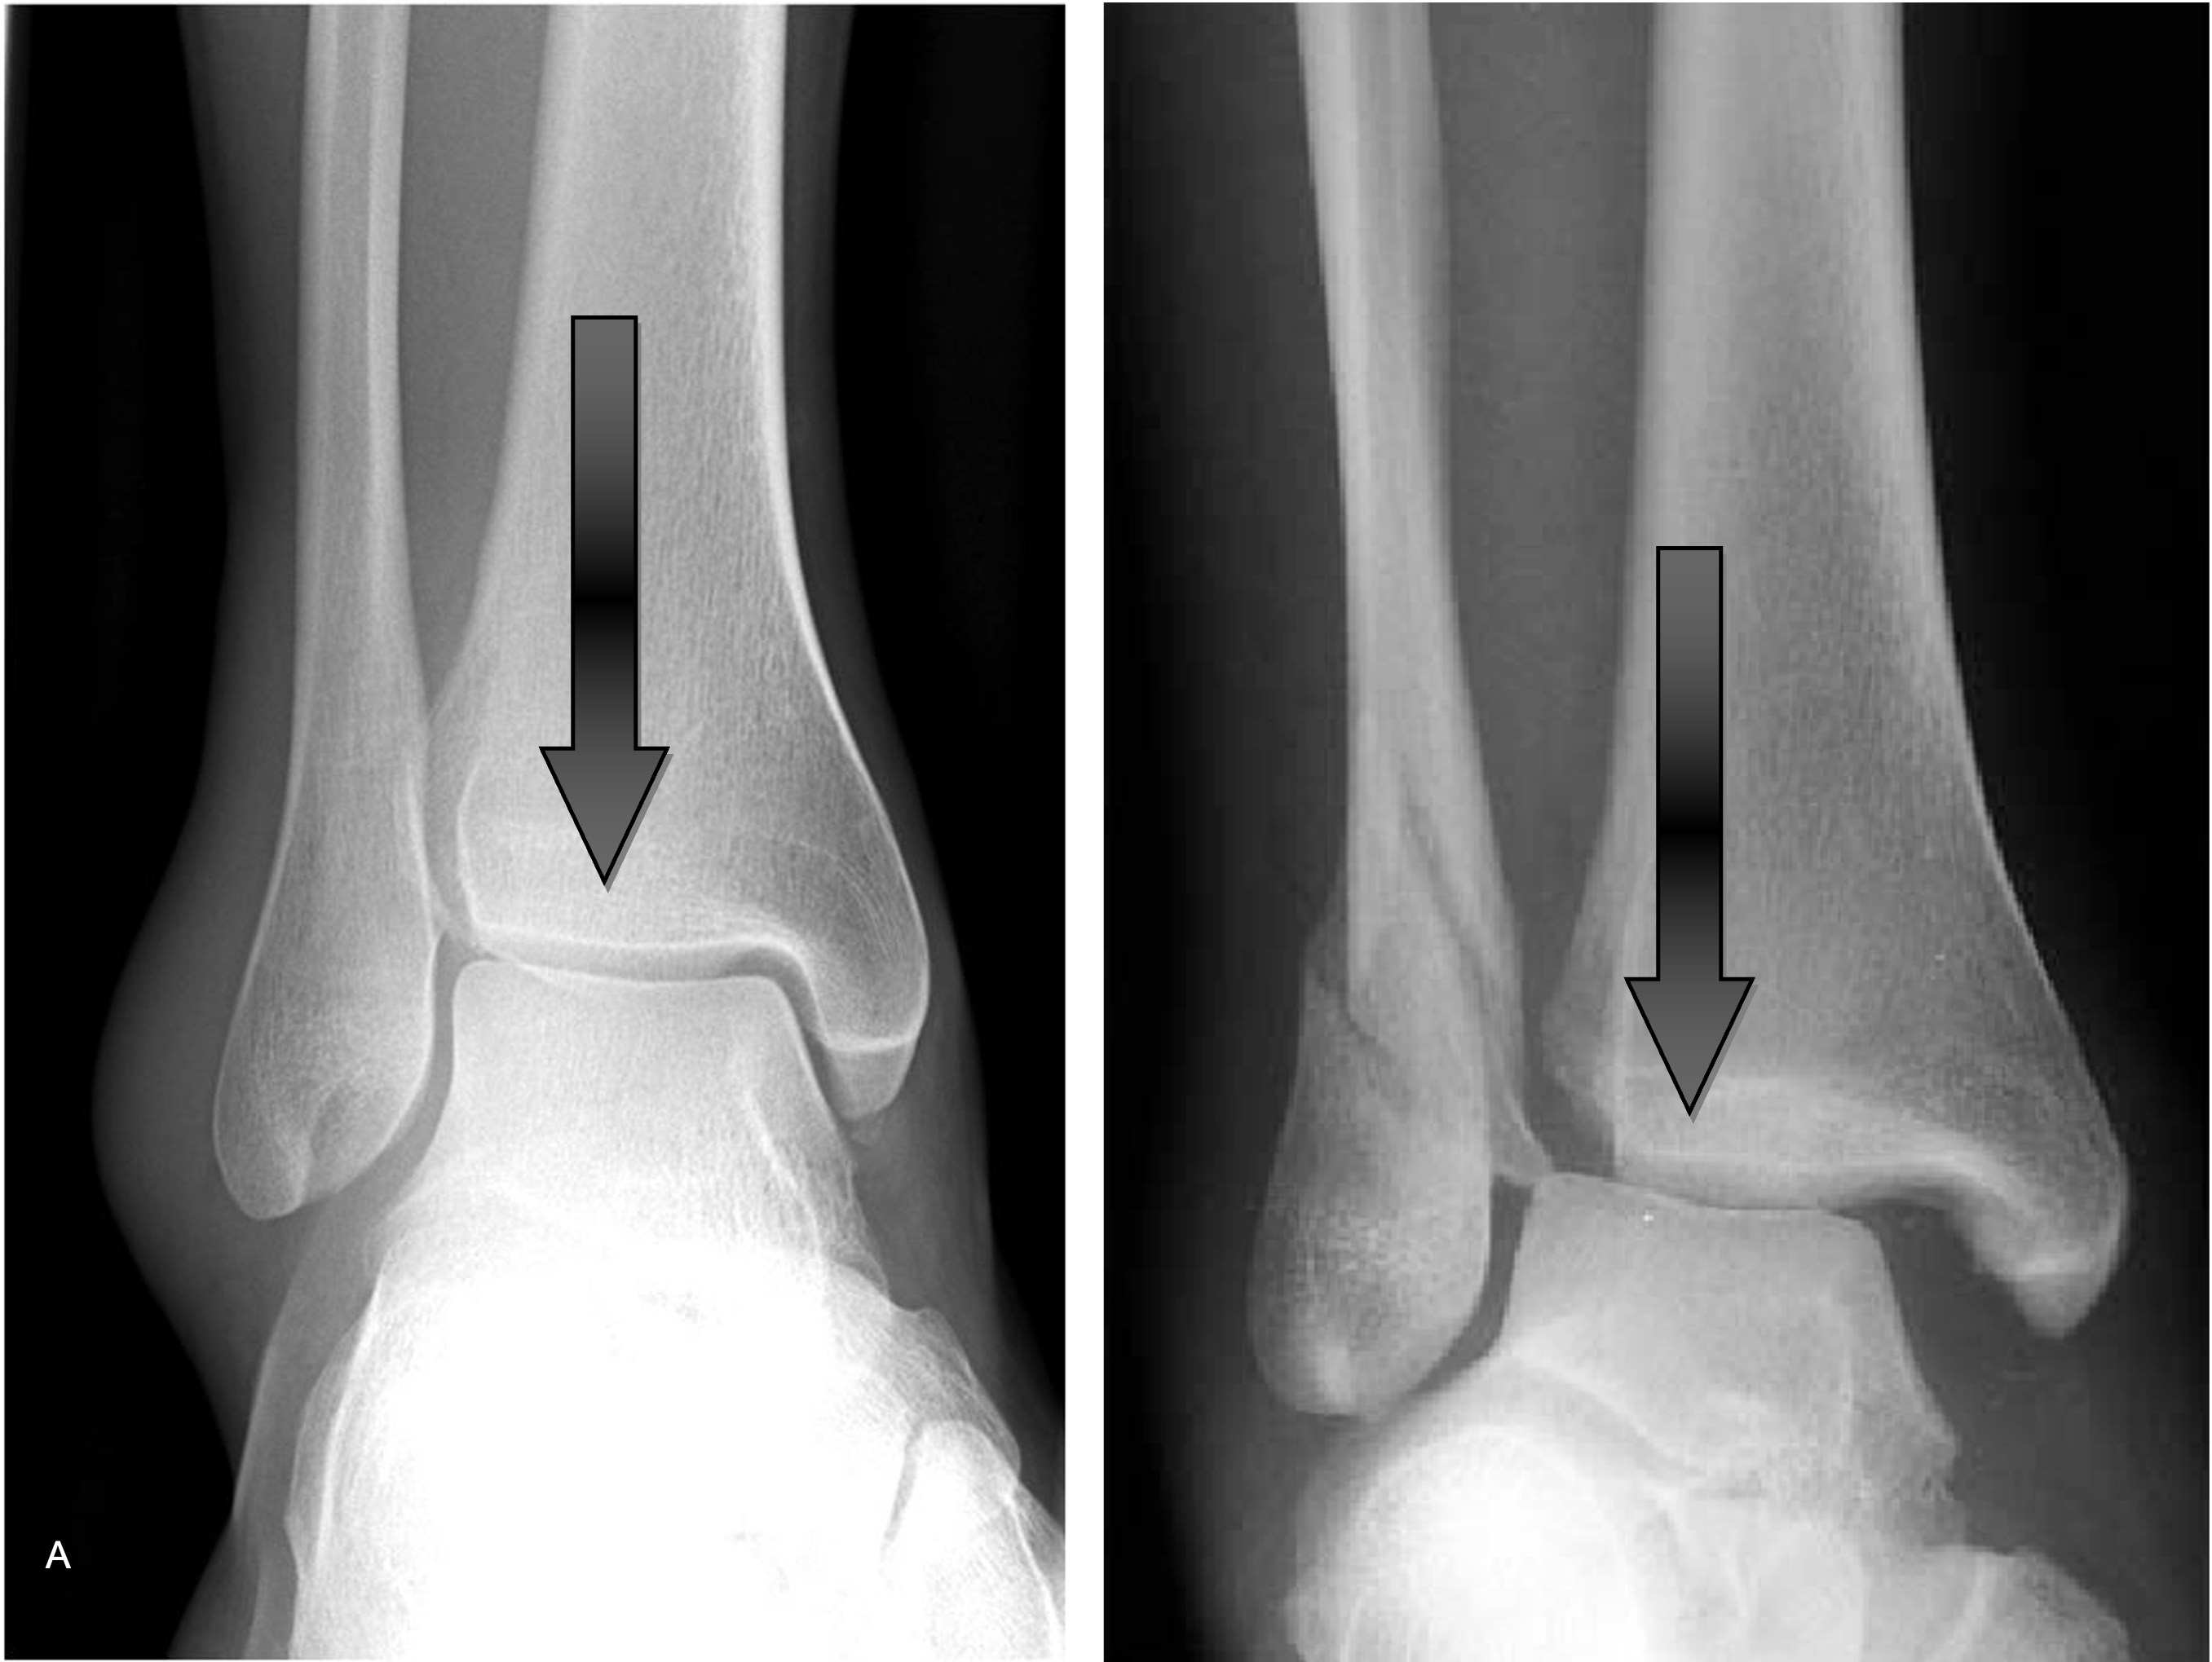 https://orthopedicreviews.openmedicalpublishing.org/article/35688-outcomes-after-unstable-fractures-of-the-ankle-what-s-new-a-systematic-review/attachment/90435.png